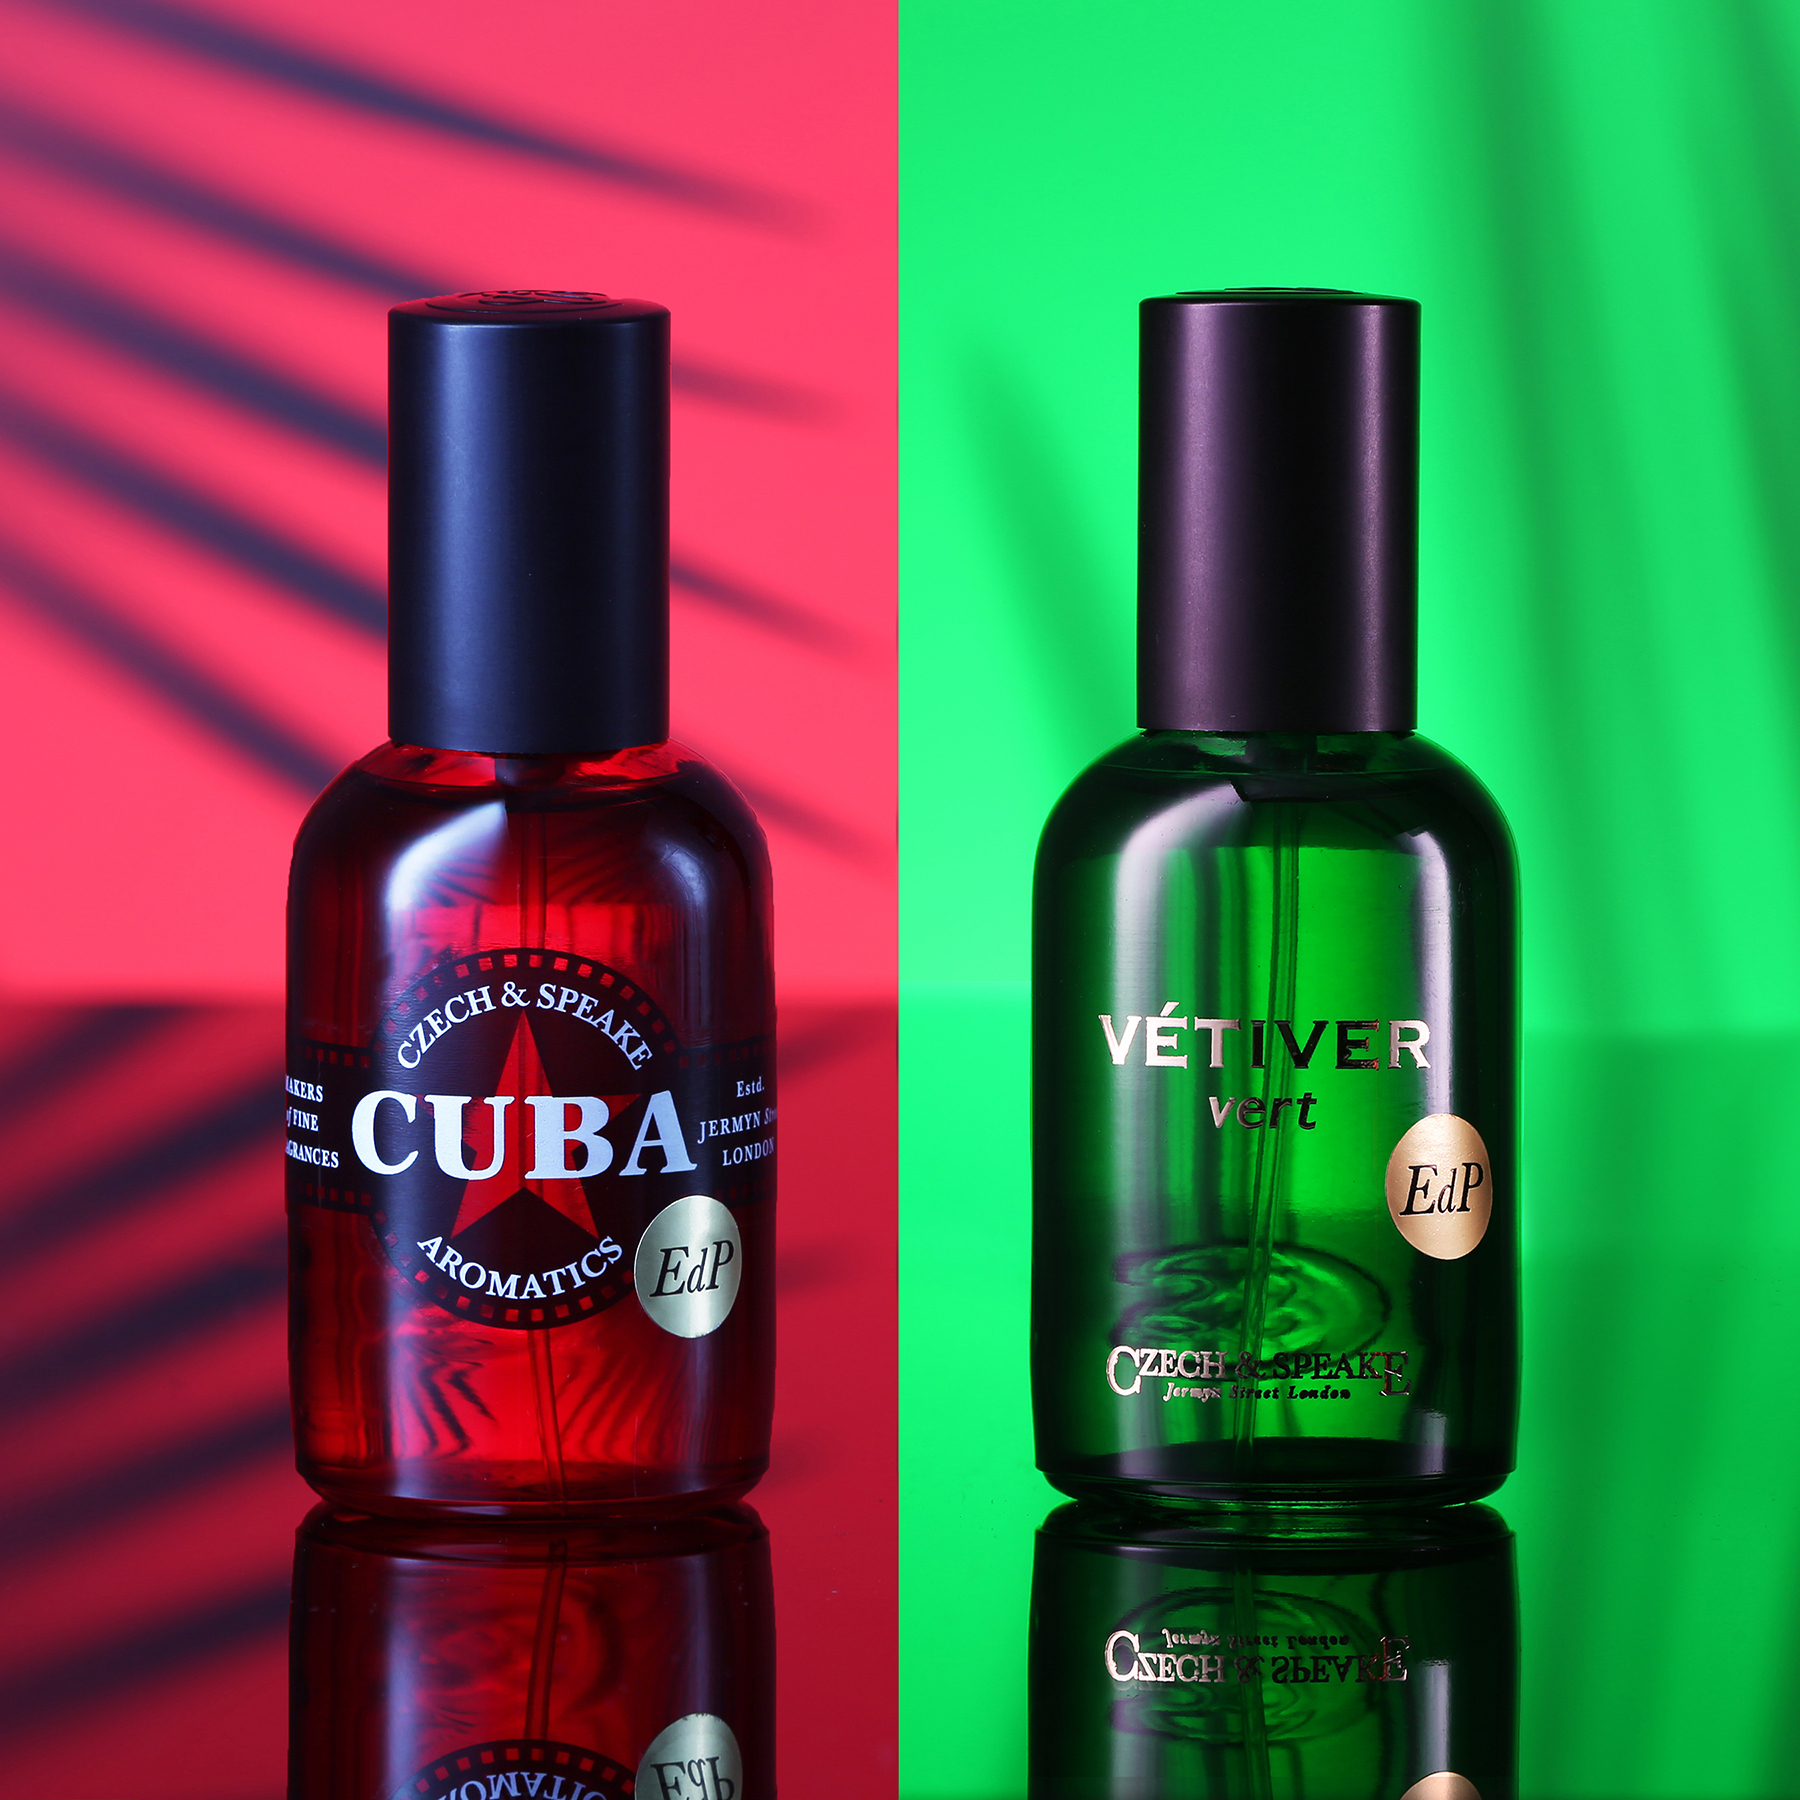 Cuba and Vetiver Vert Edp 50ml split screen red and green